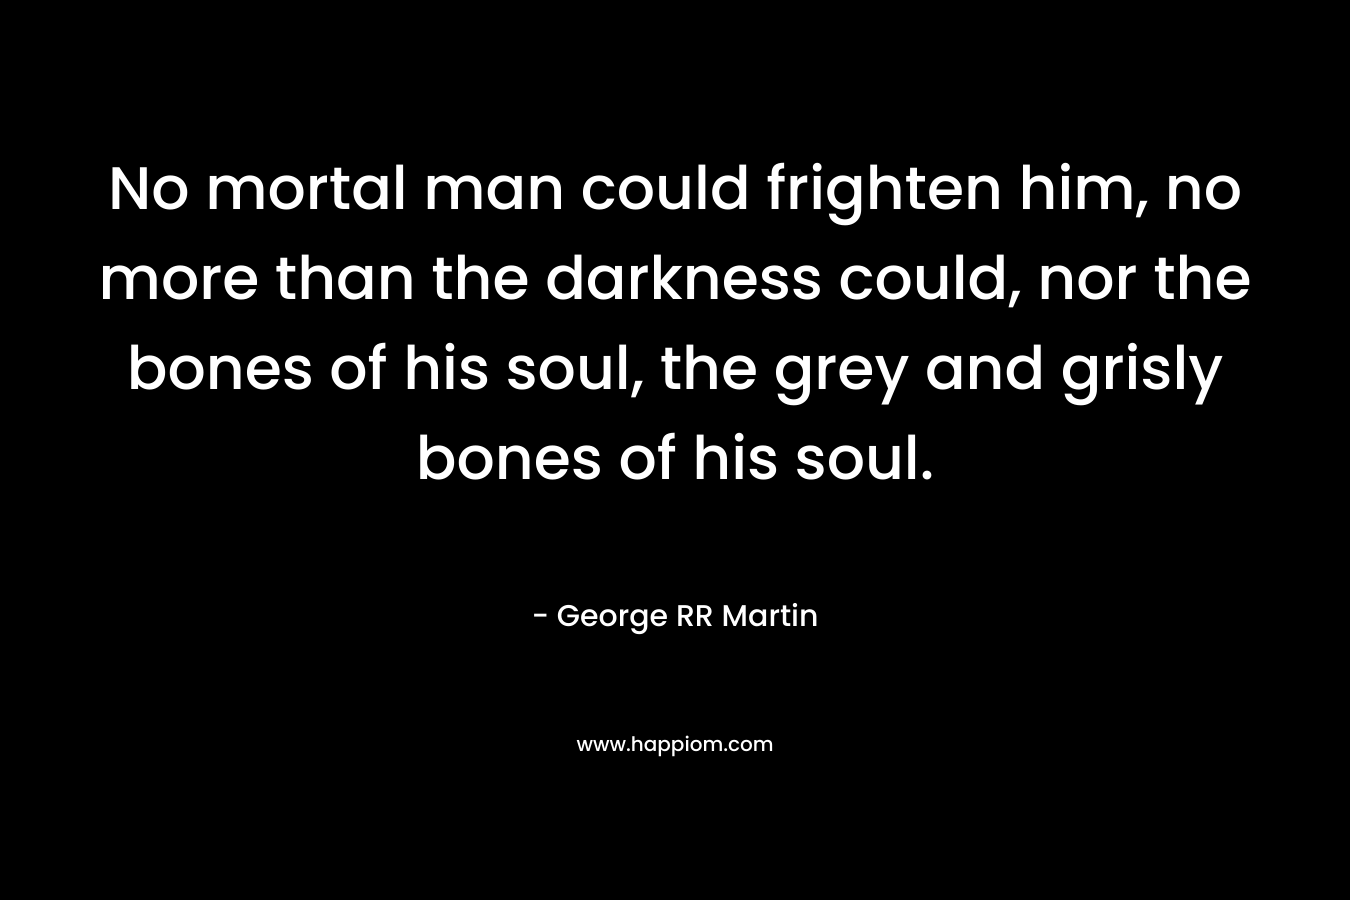 No mortal man could frighten him, no more than the darkness could, nor the bones of his soul, the grey and grisly bones of his soul.